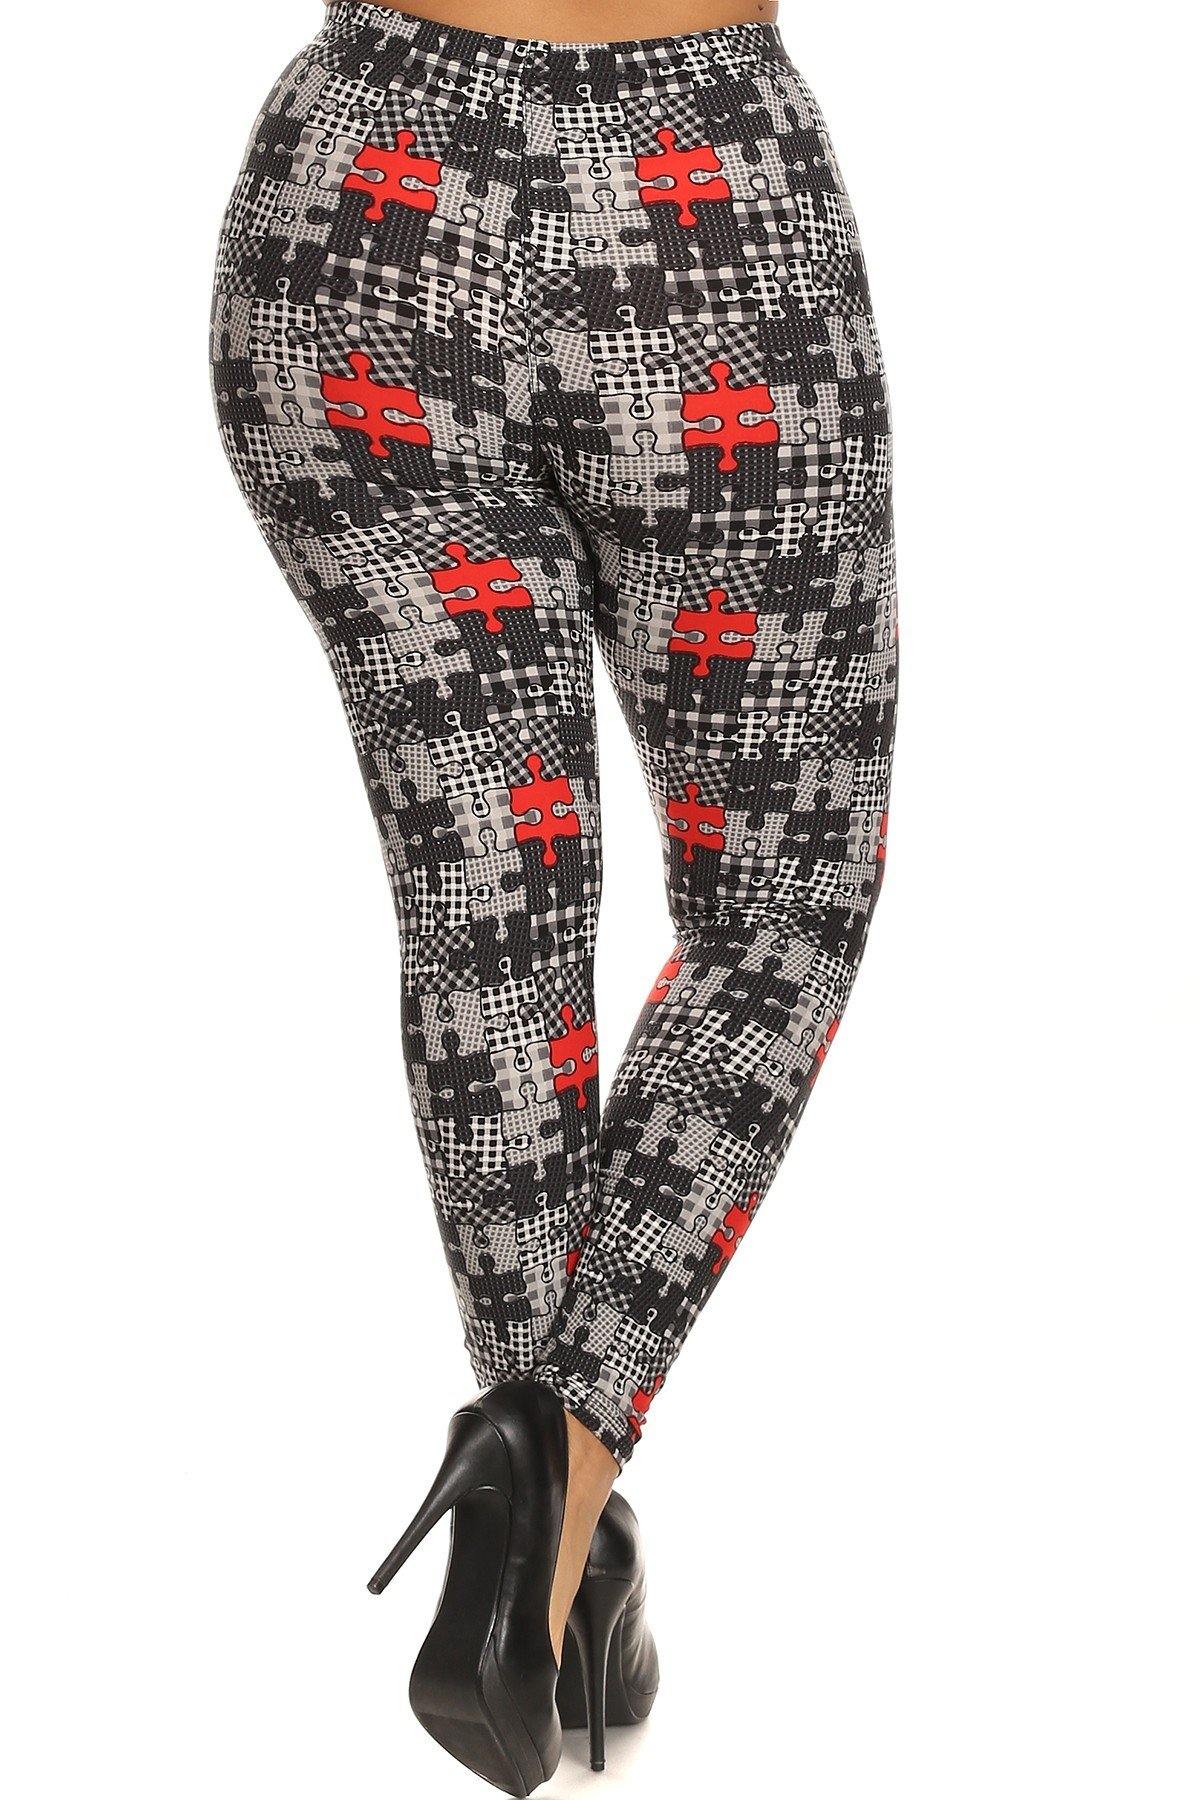 Plus Size Puzzle/plaid Print, Full Length Leggings In A Slim Fitting Style With A Banded High Waist - Pearlara